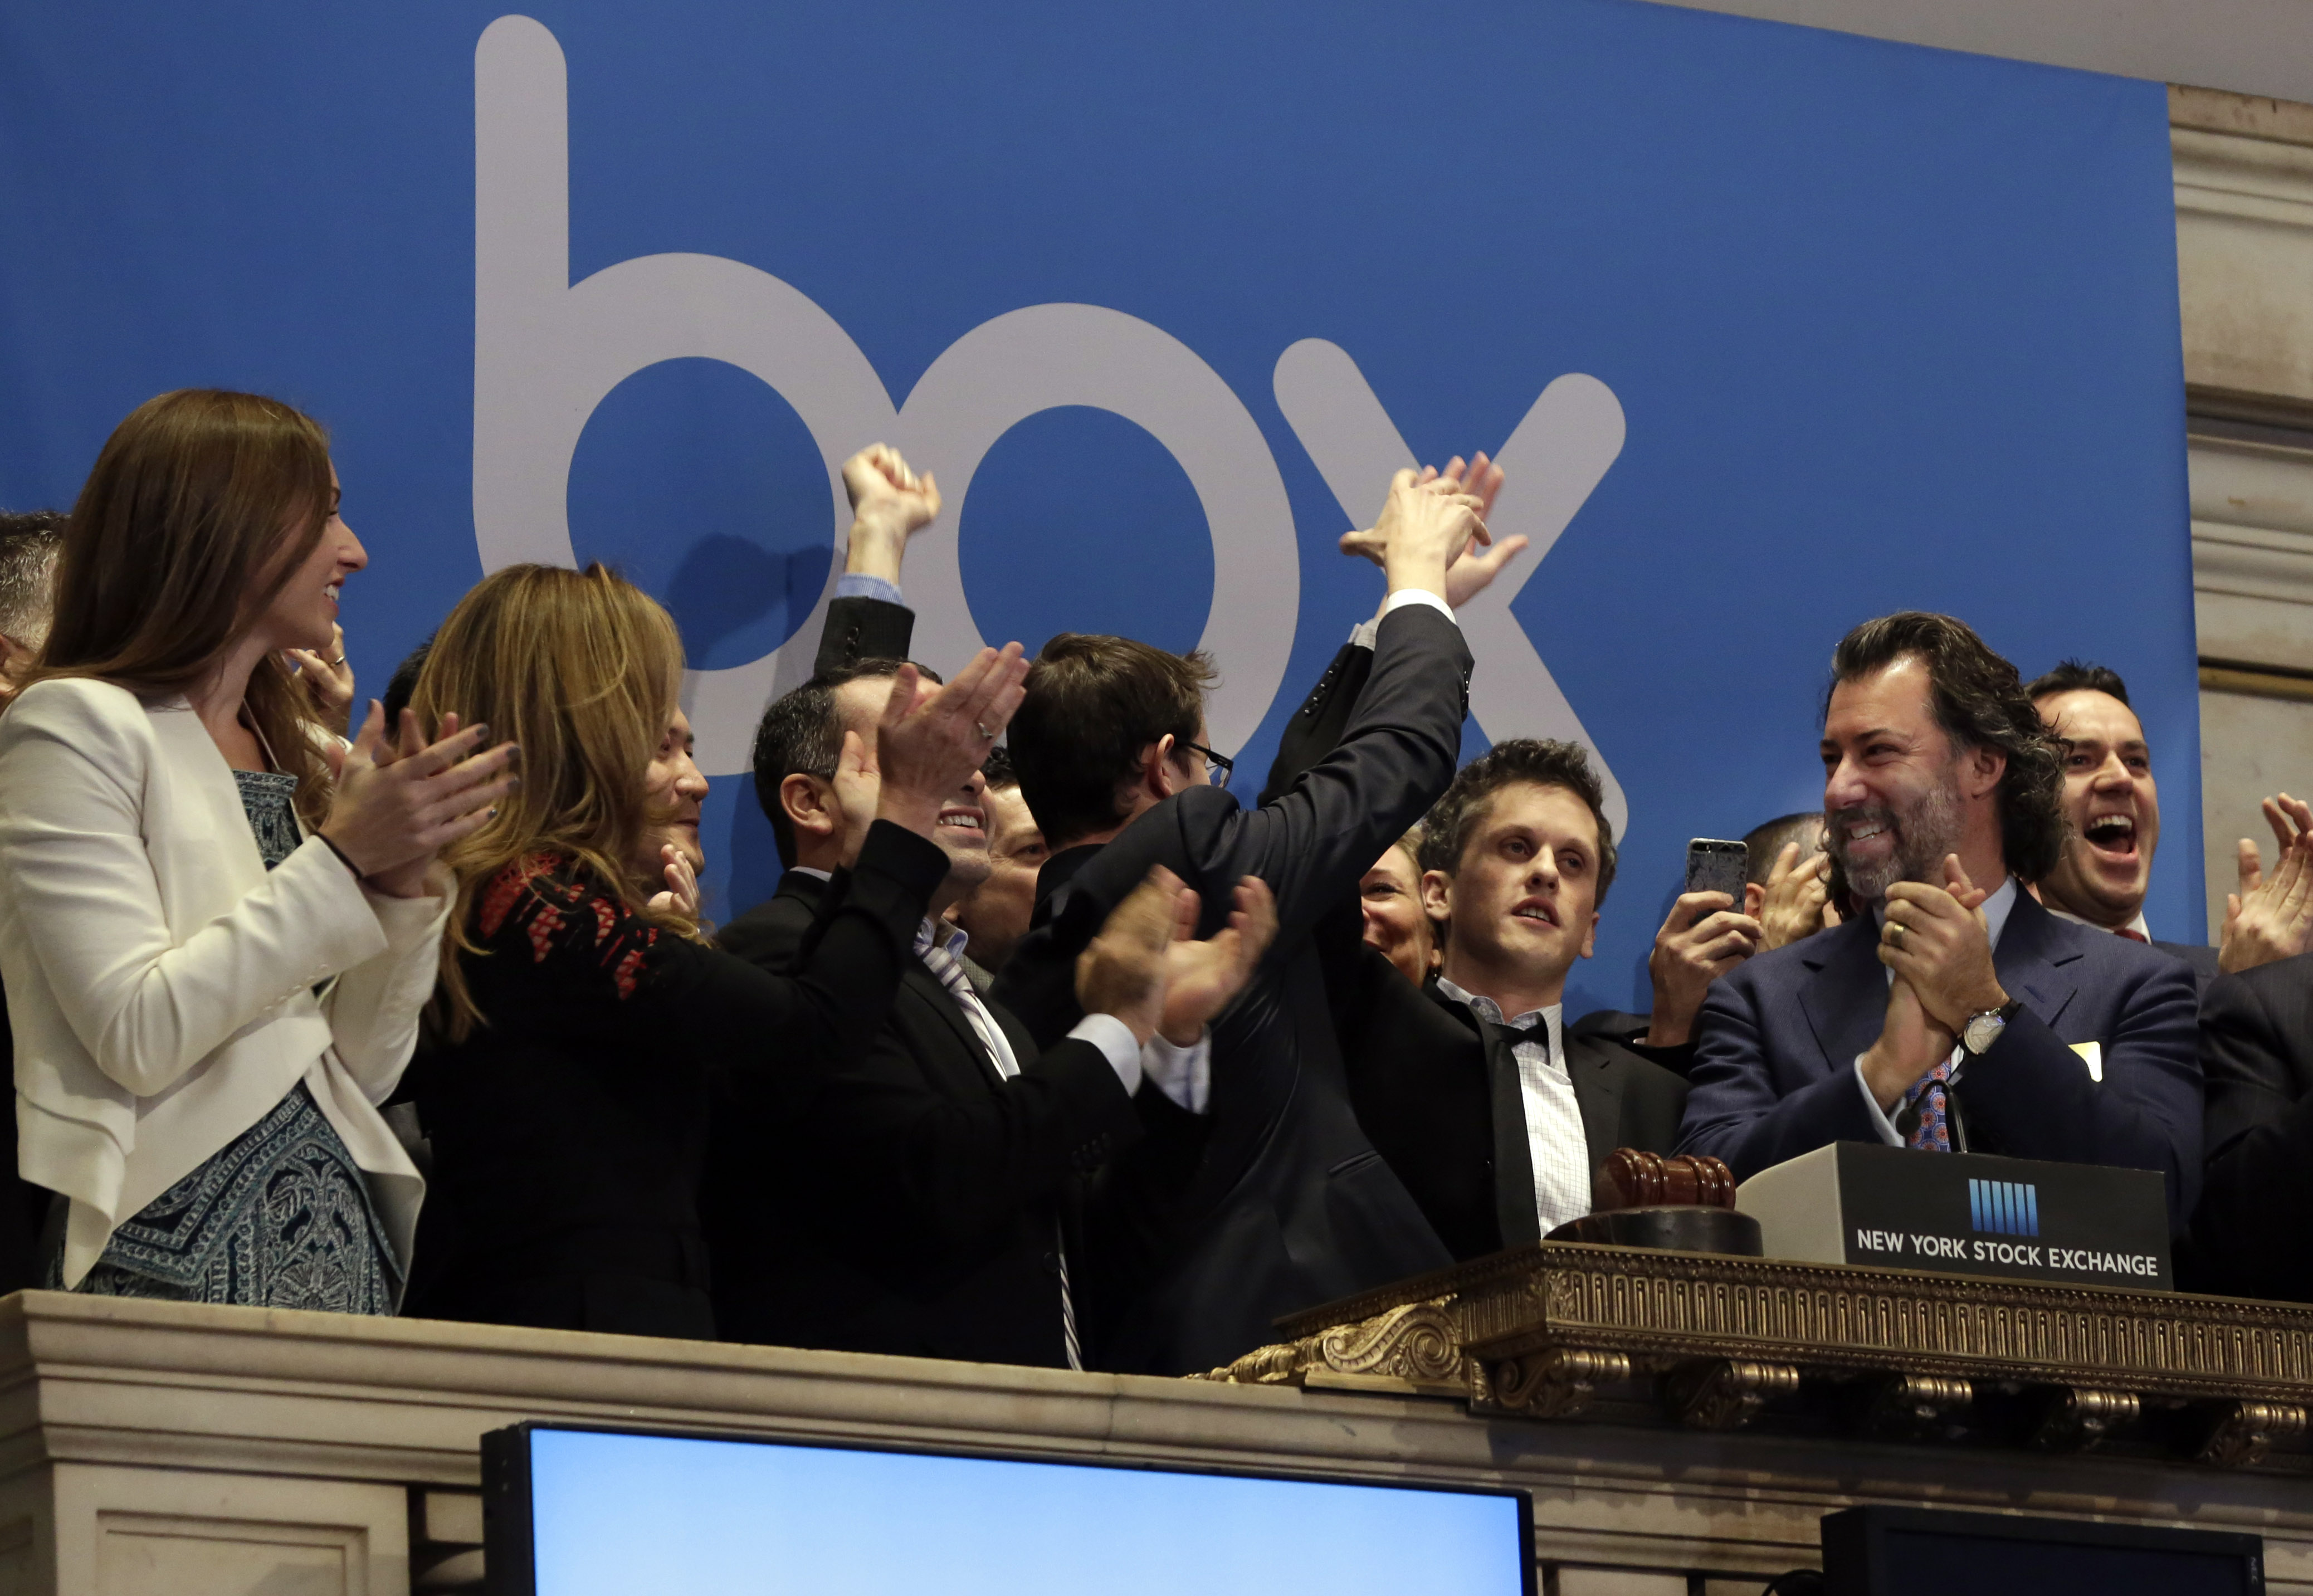 Box, Inc. Chairman, CEO &amp; co-founder Aaron Levie, second from right, gets a high-five during opening bell ceremonies to mark the company's IPO at the New York Stock Exchange on Jan. 23, 2015. (Richard Drew—AP)